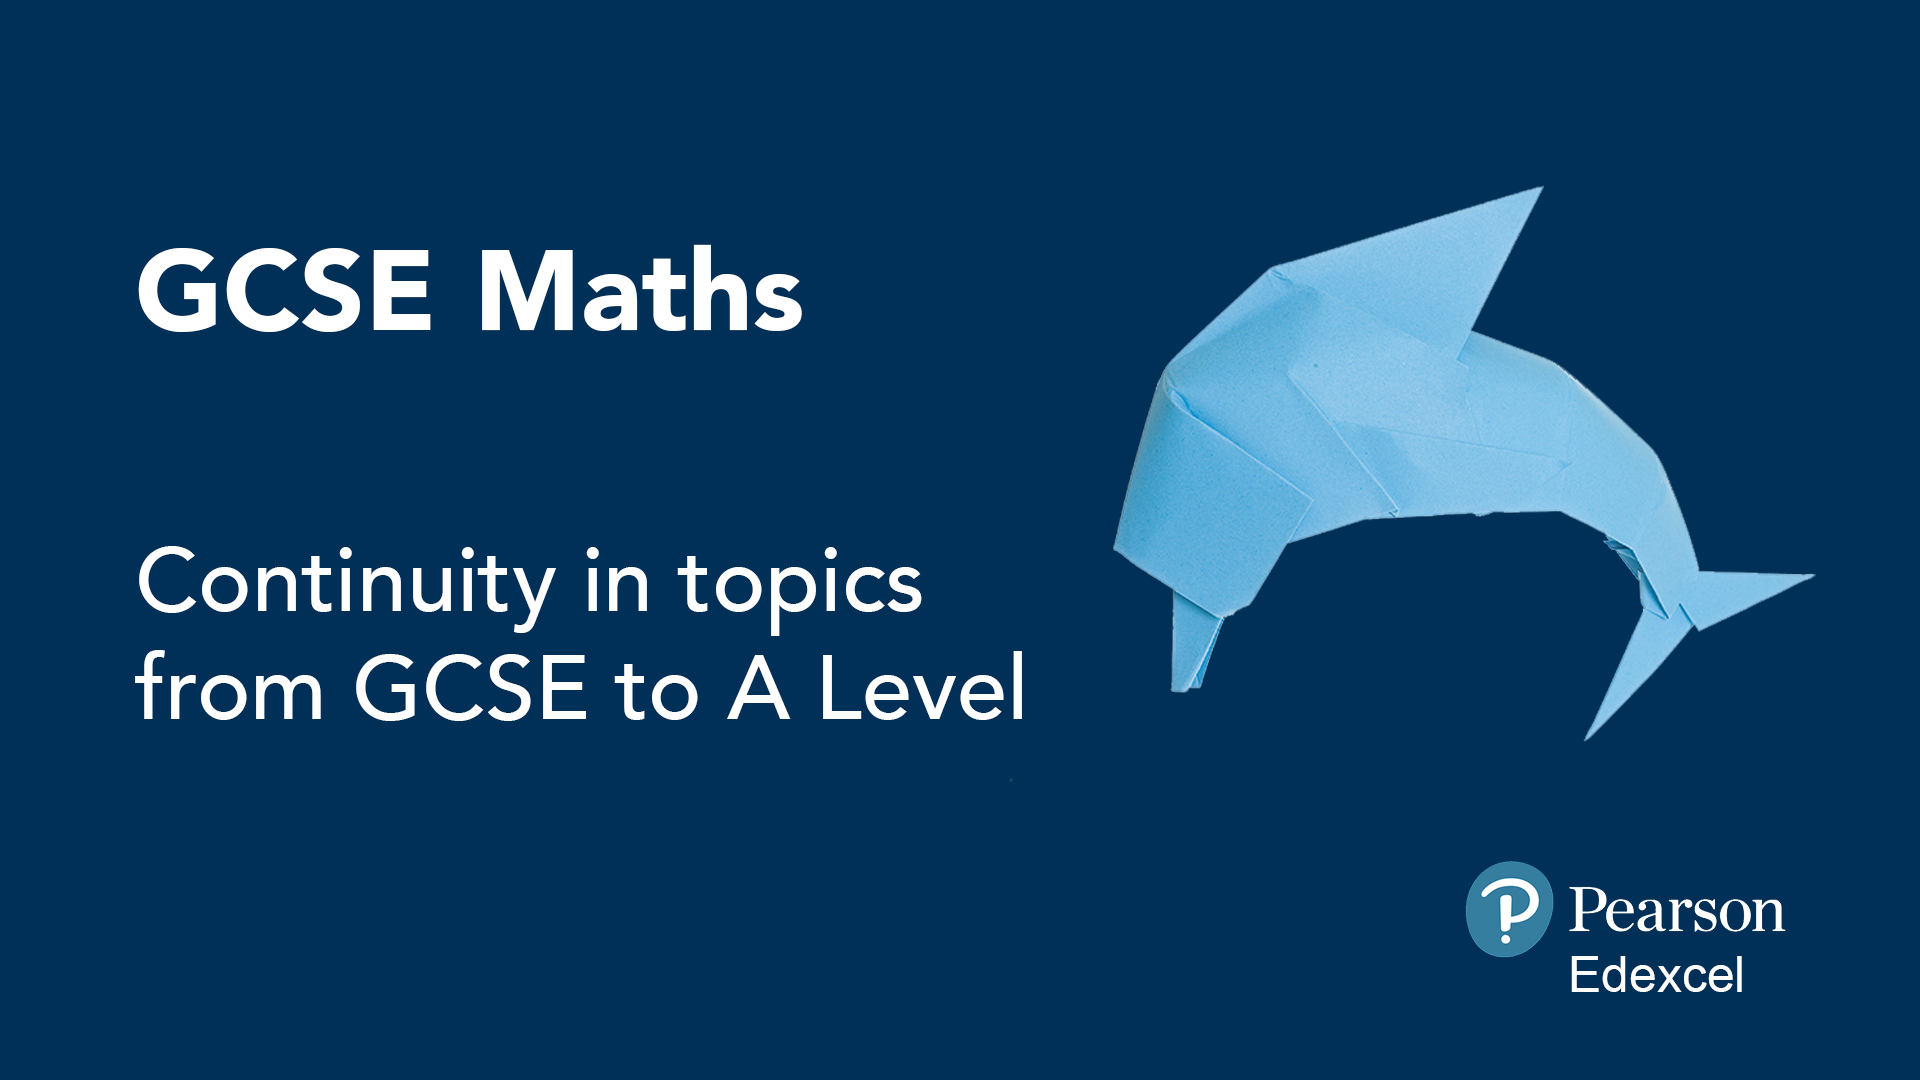 GCSE Maths: Continuity in topics from GCSE to A level